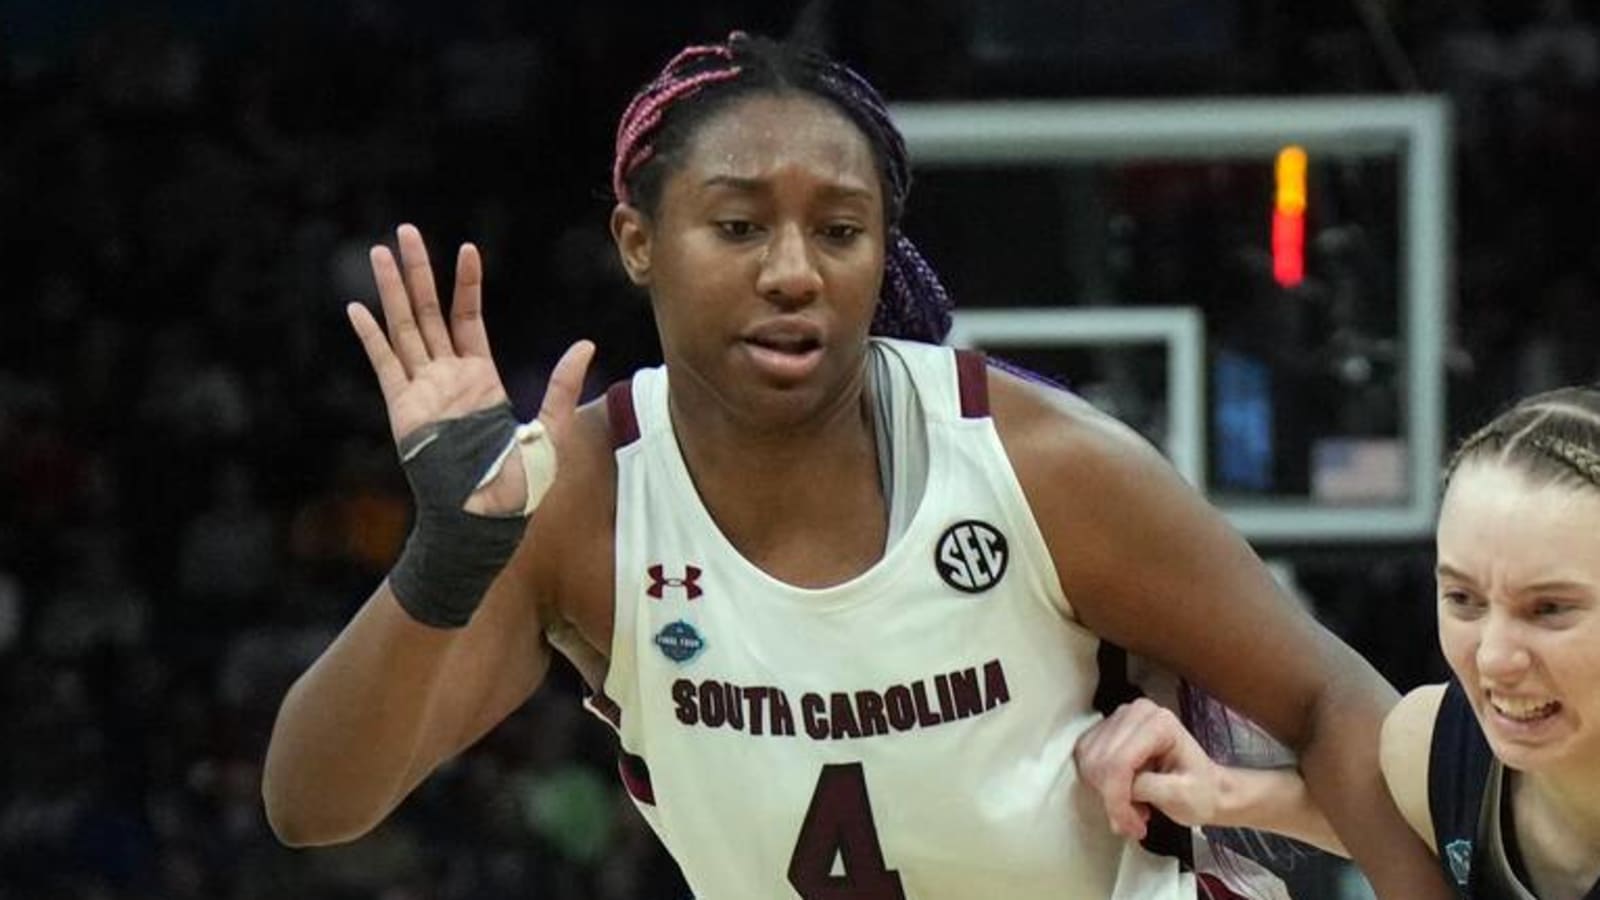 Aliyah Boston all smiles after South Carolina wins title